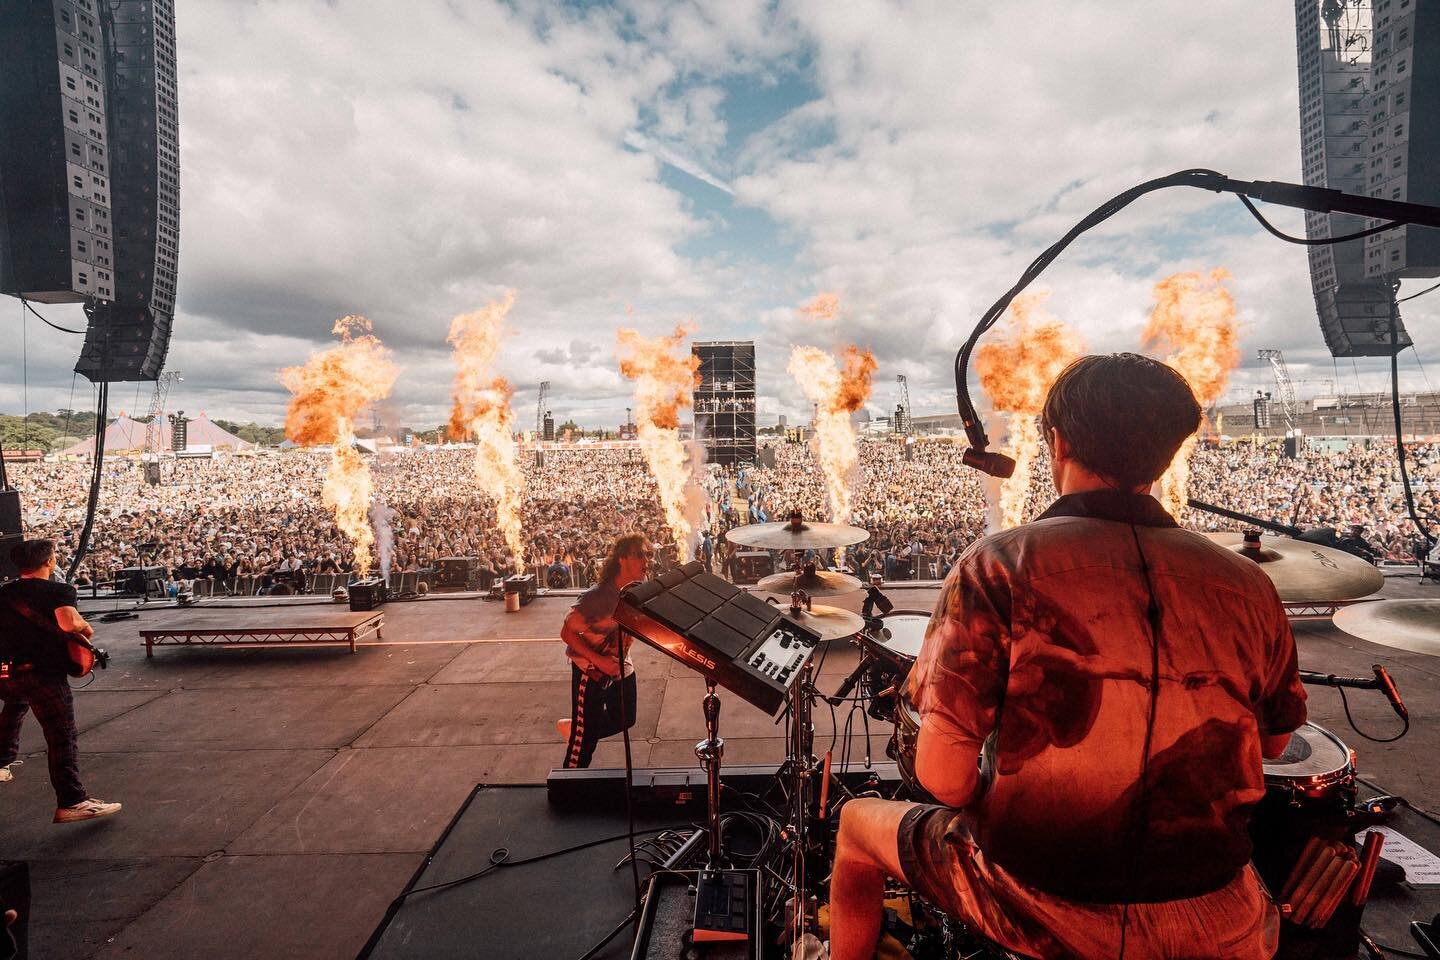 It&rsquo;s @donbroco. It&rsquo;s 🔥. Awesome week of shows with the lads.
-
Trying to not lose my mind on the main stage at @officialrandl. Seeing bands on this stage on tv as a kid are core memories that led to me wanting to pursue music as a career